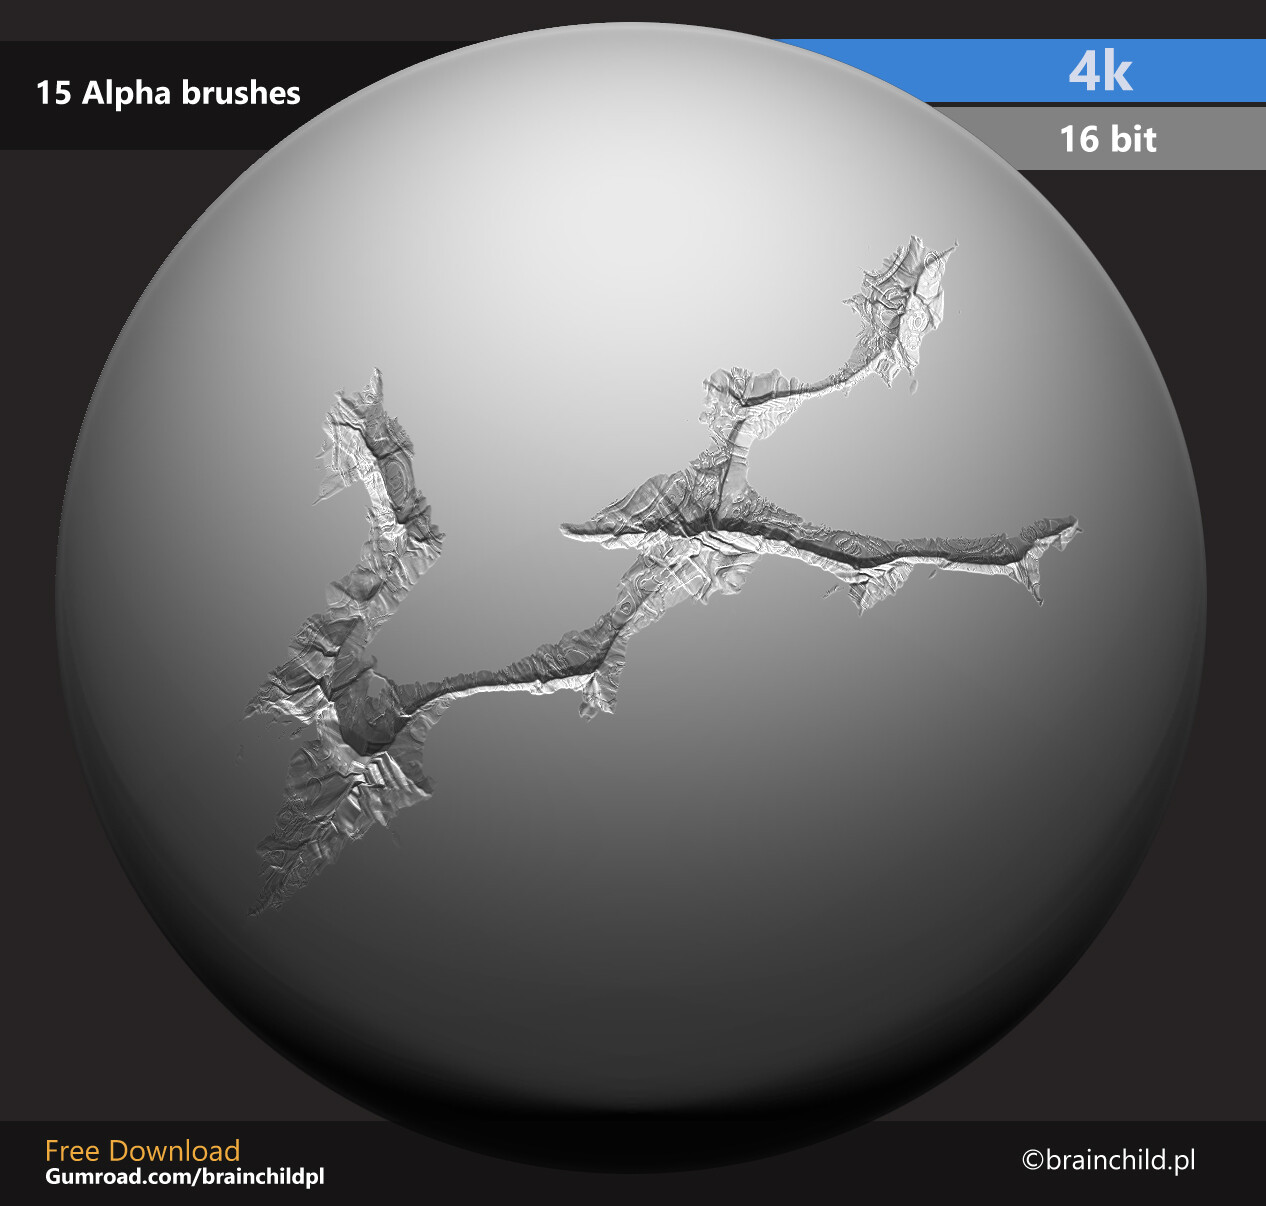 zbrush alpha free download